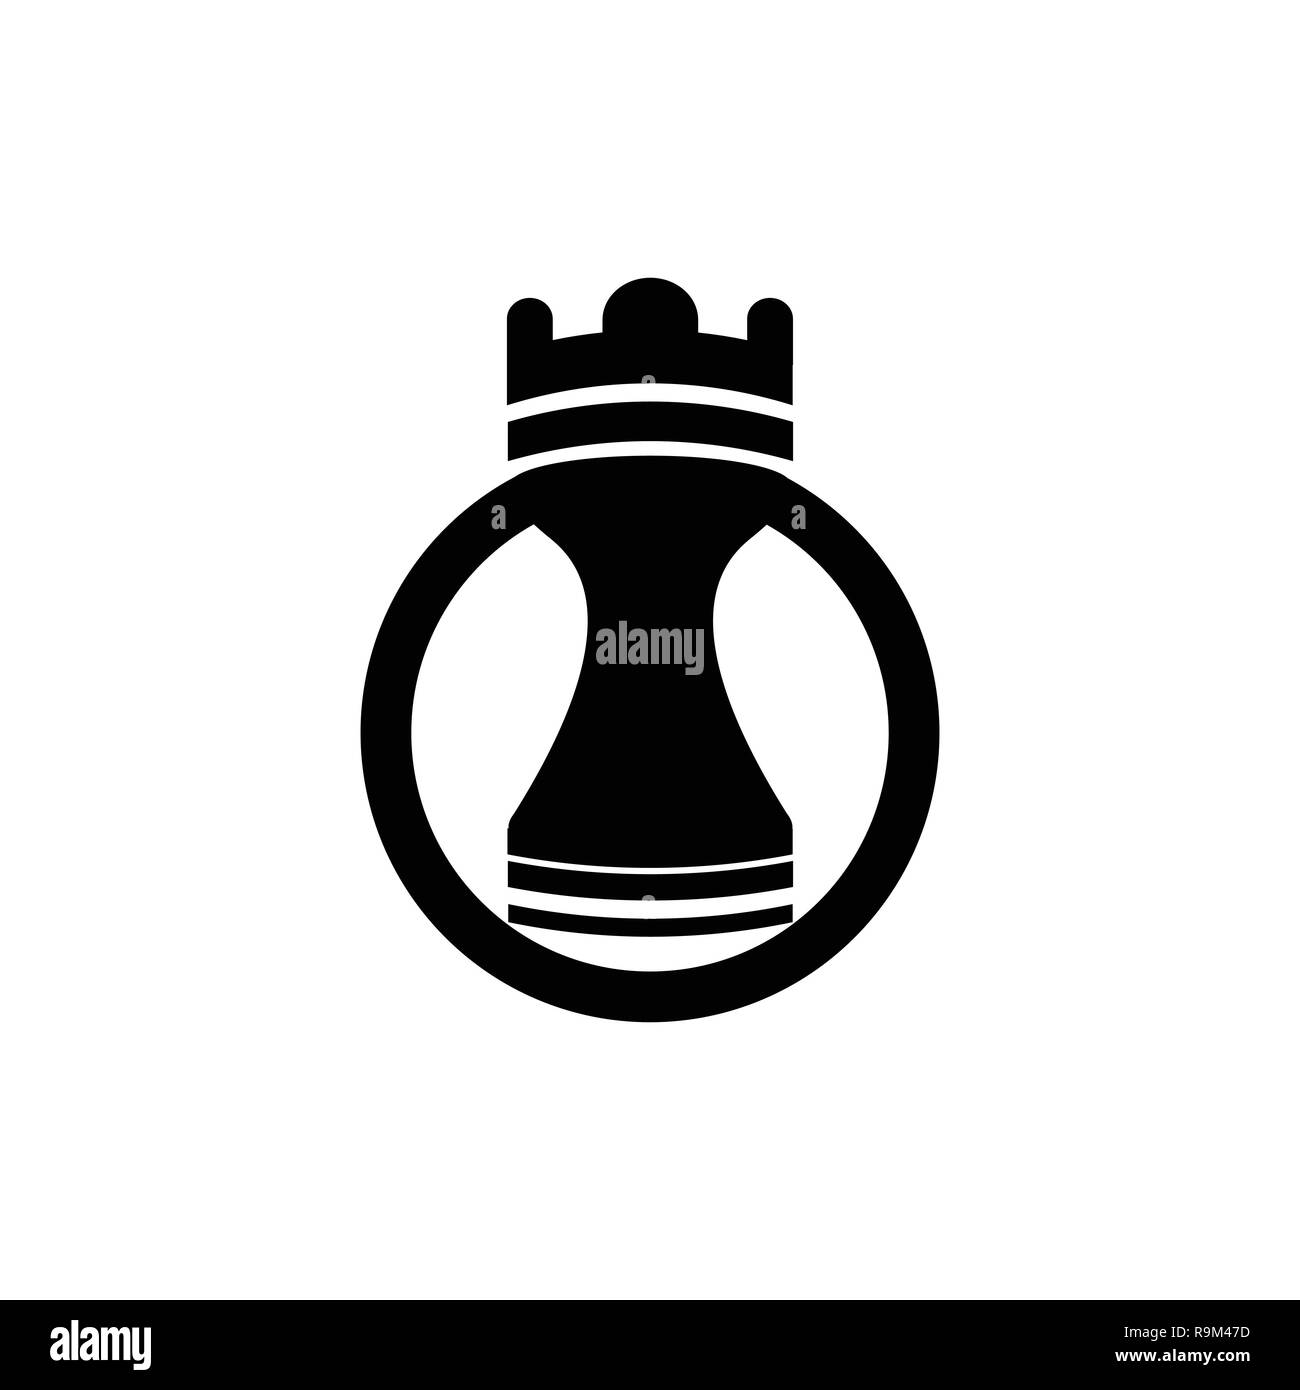 Chess piece icon isolated on white background. Chess piece icon in trendy design style. Chess piece vector icon modern and simple flat symbol for web  Stock Vector